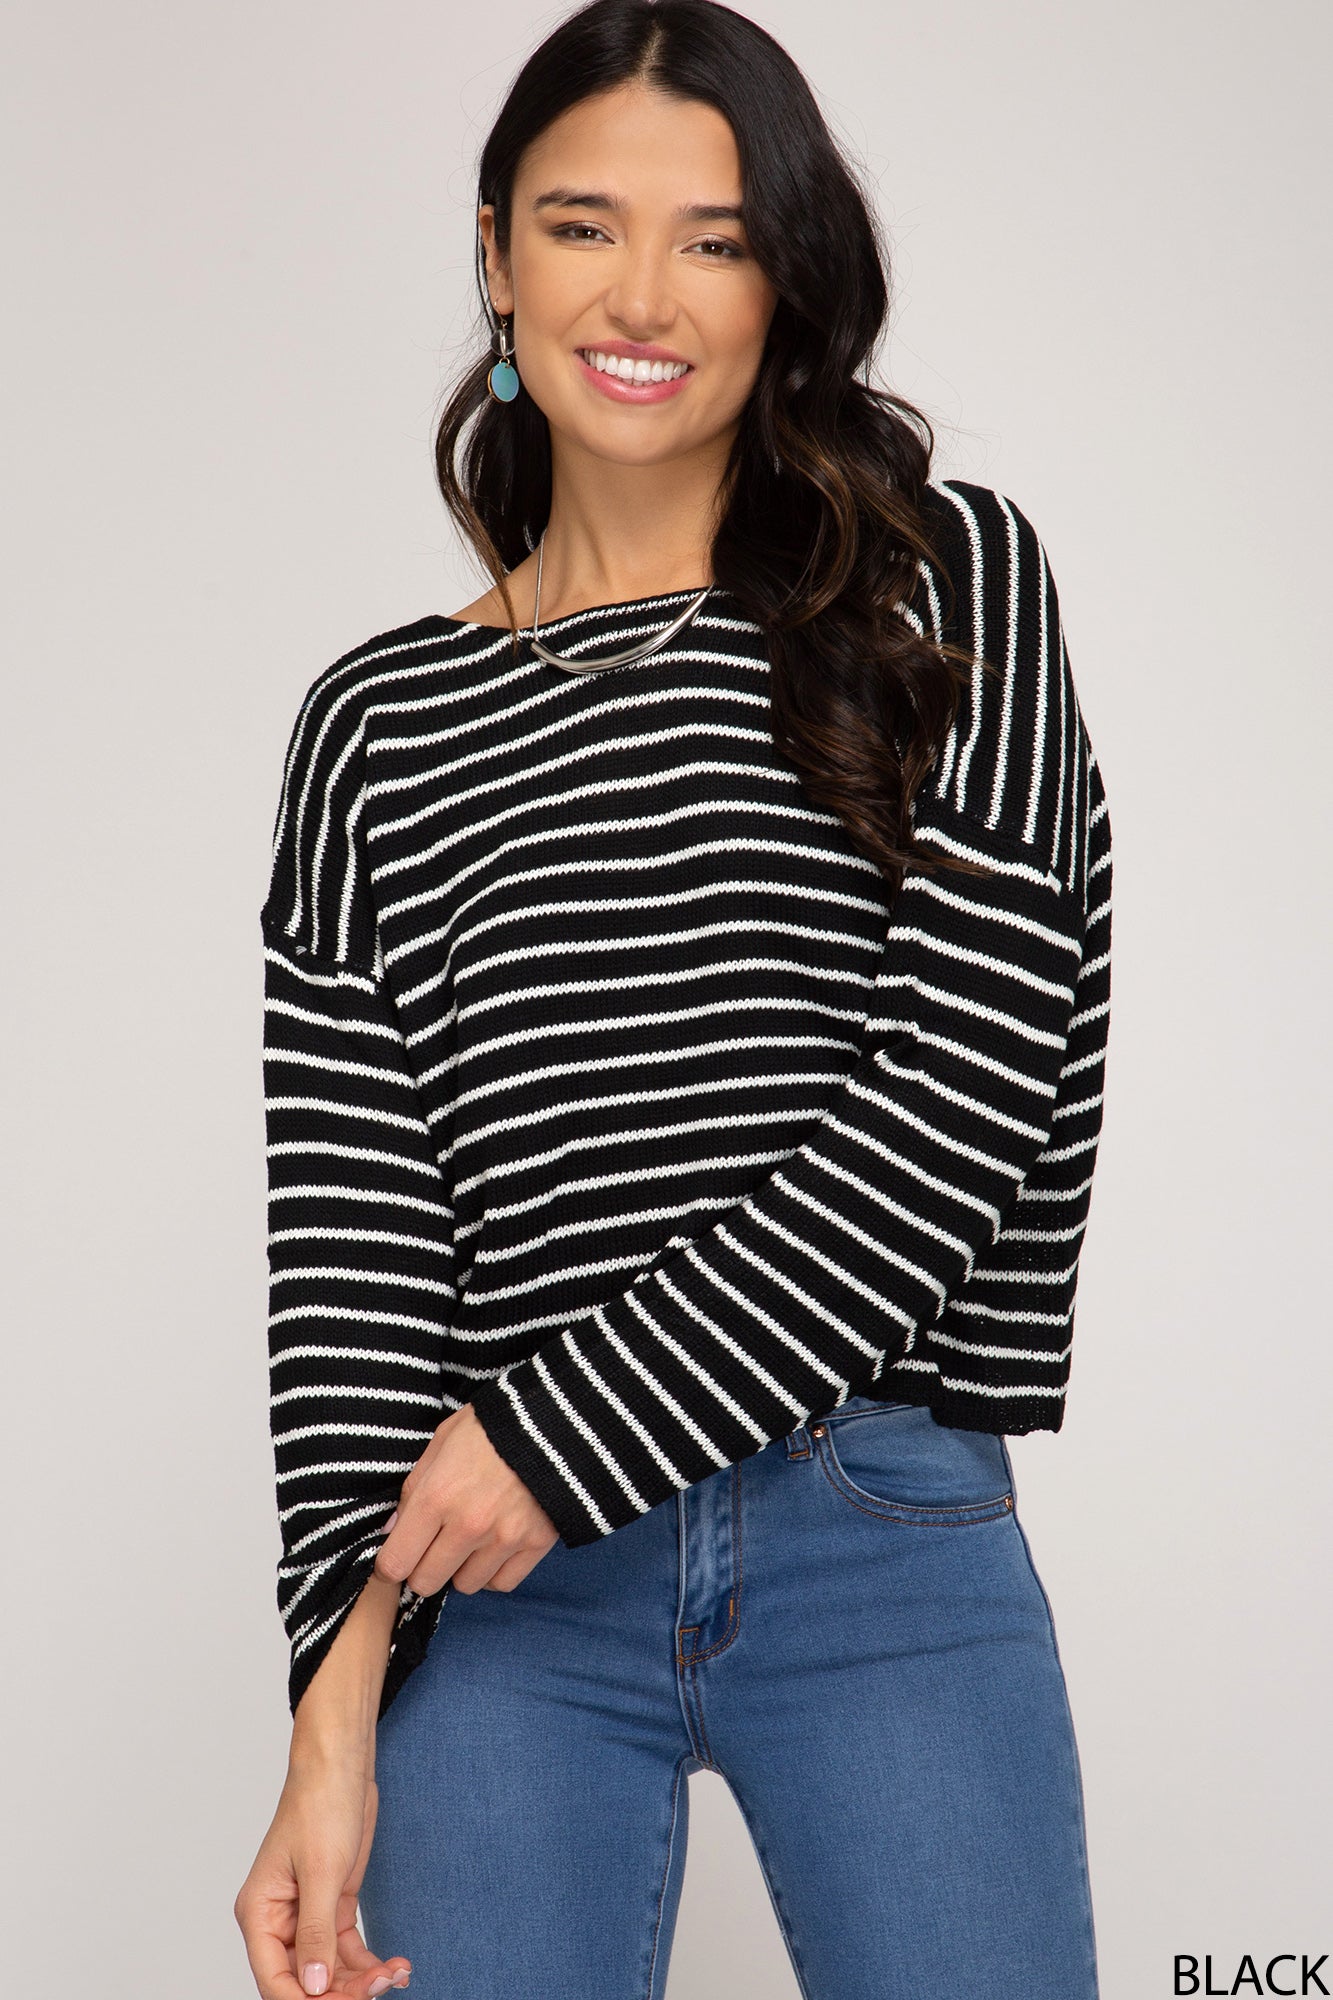 Long Sleeve Striped Sweater With Open Back Detail!